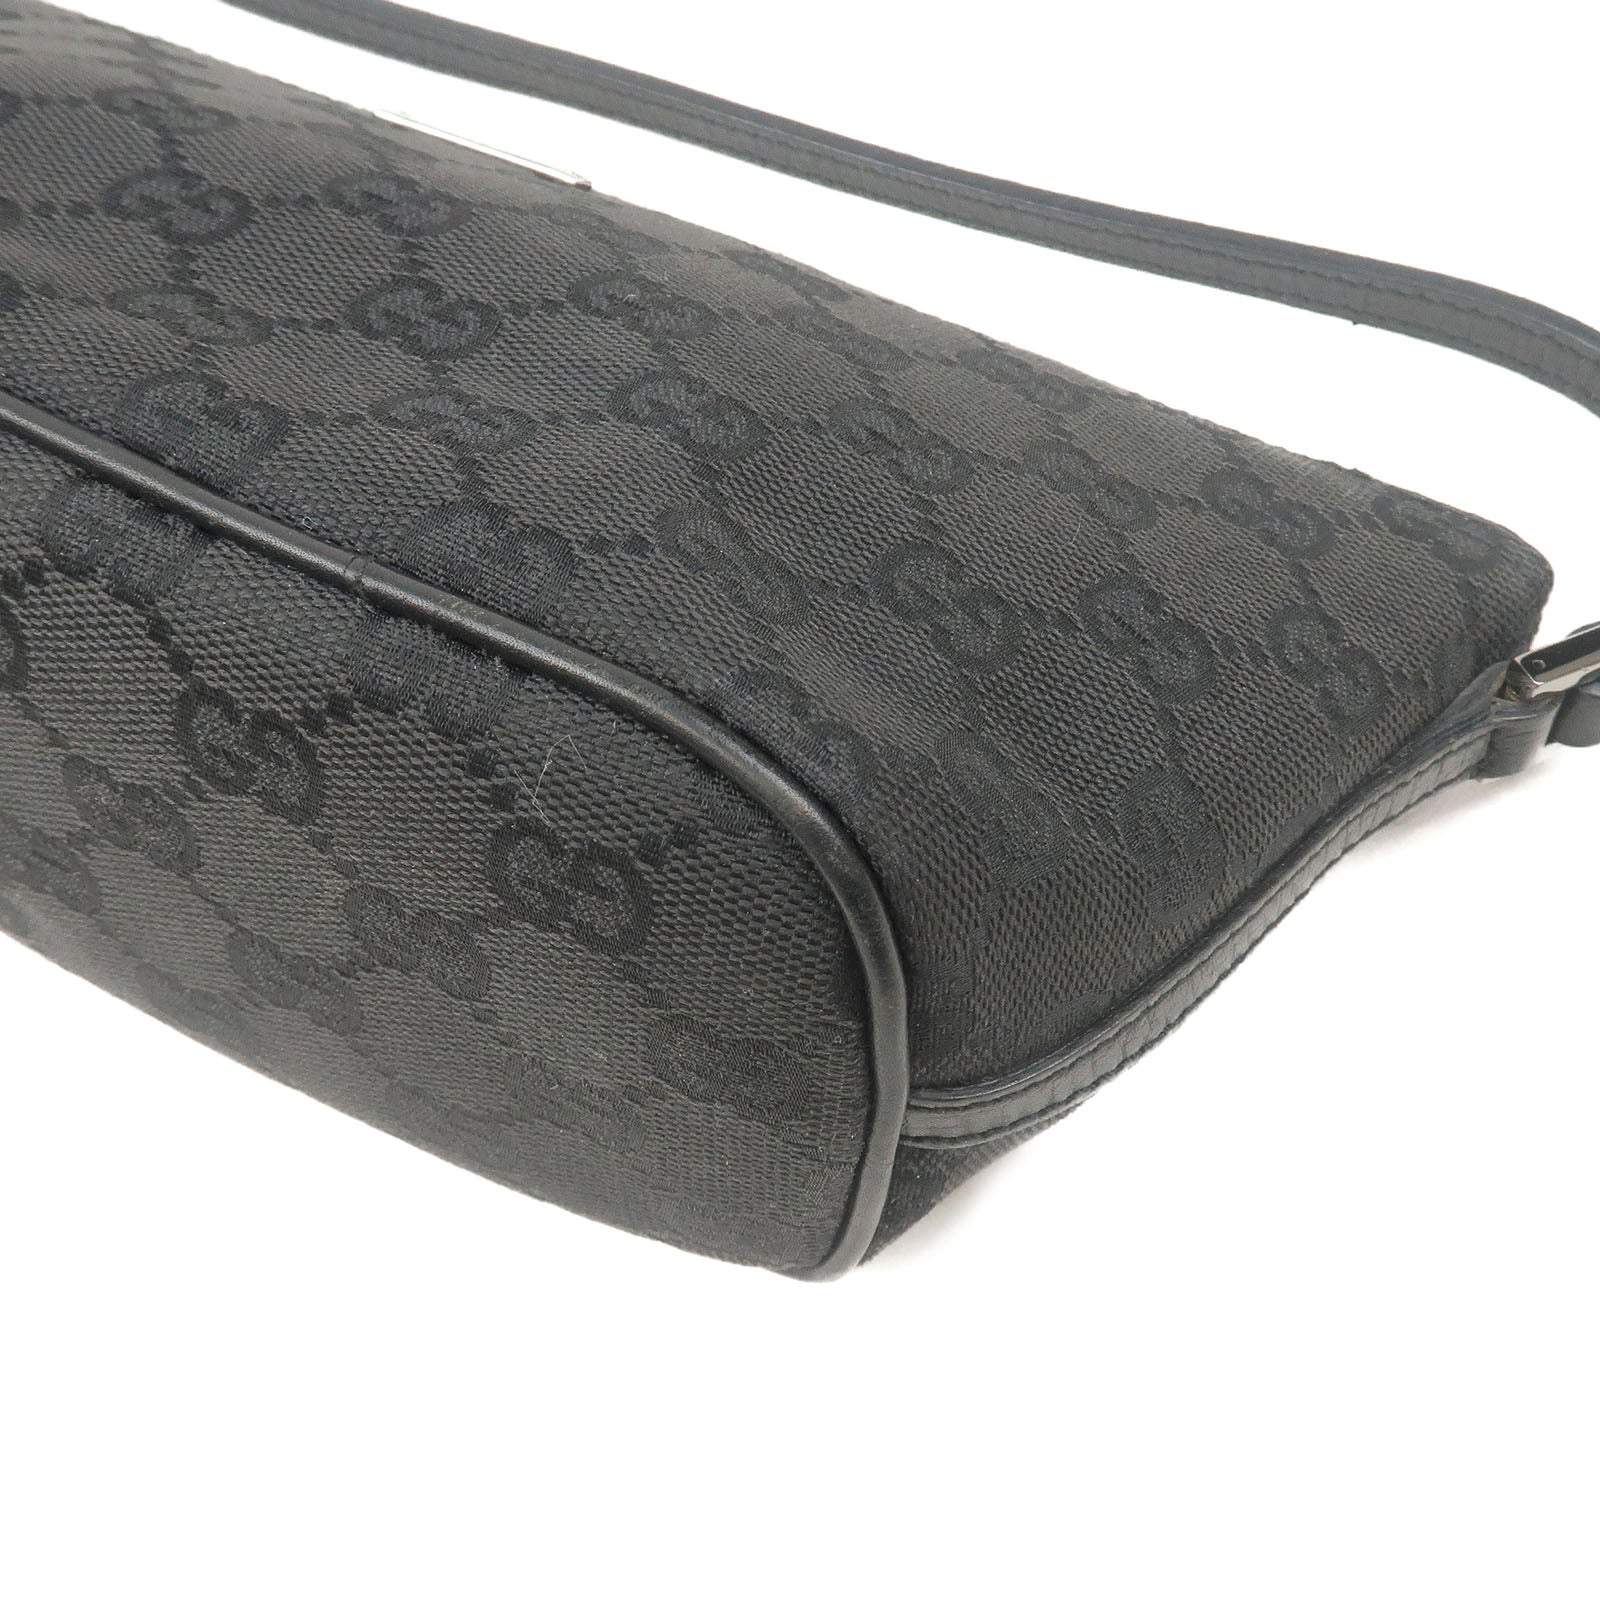 GUCCI-GG-Canvas-Leather-Pouch-Hand-Bag-Purse-Black-07198 – dct